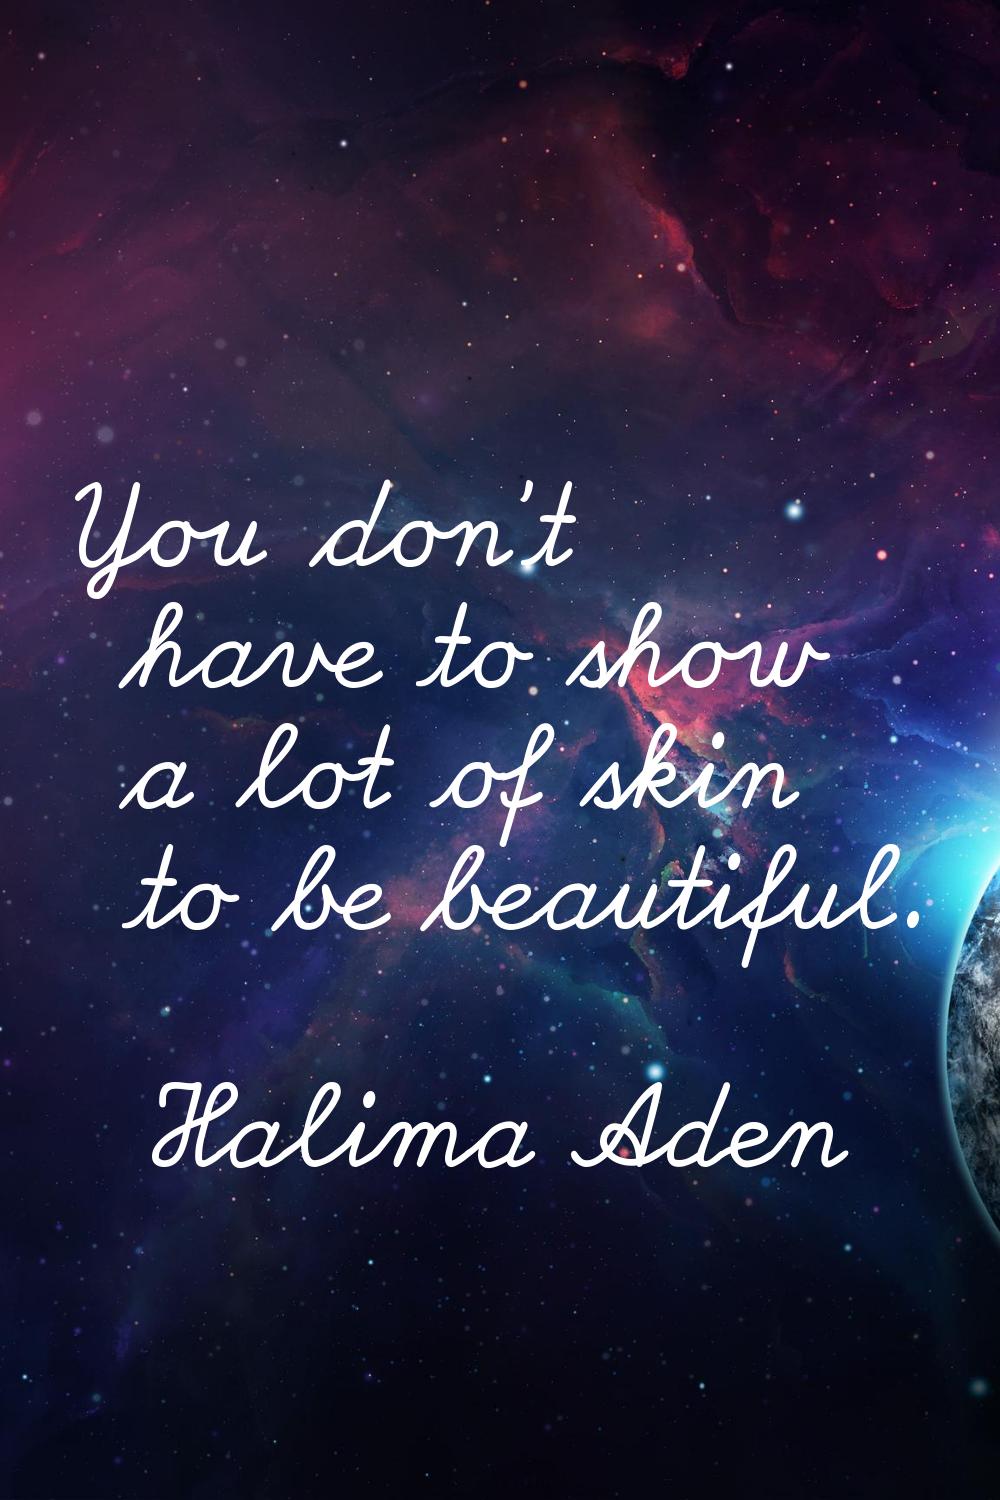 You don't have to show a lot of skin to be beautiful.